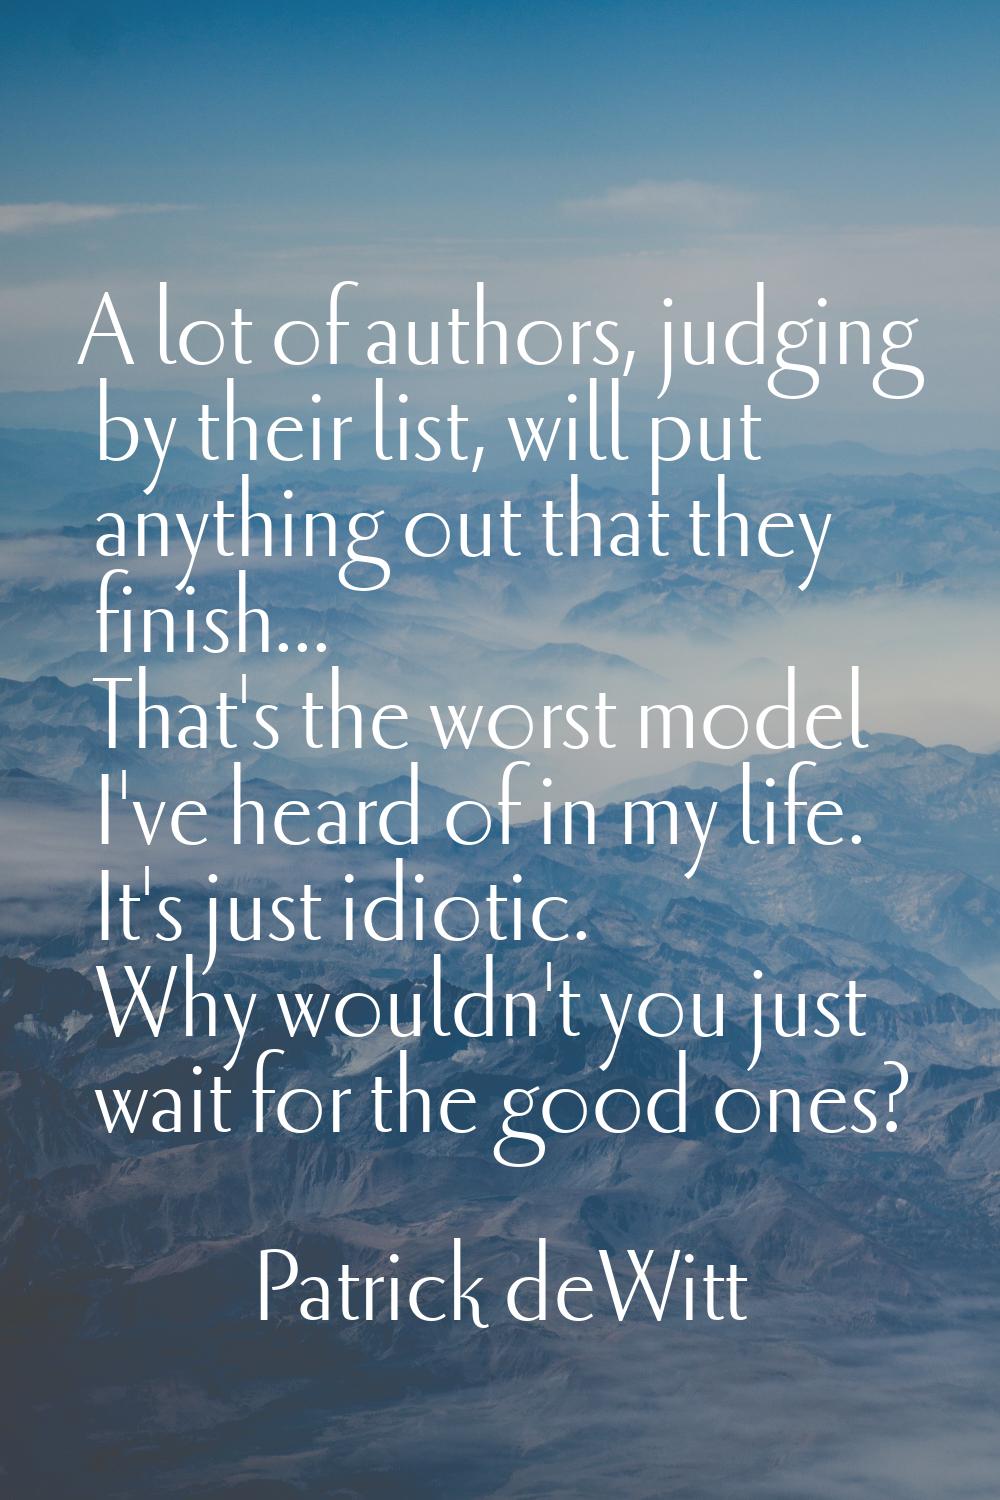 A lot of authors, judging by their list, will put anything out that they finish... That's the worst